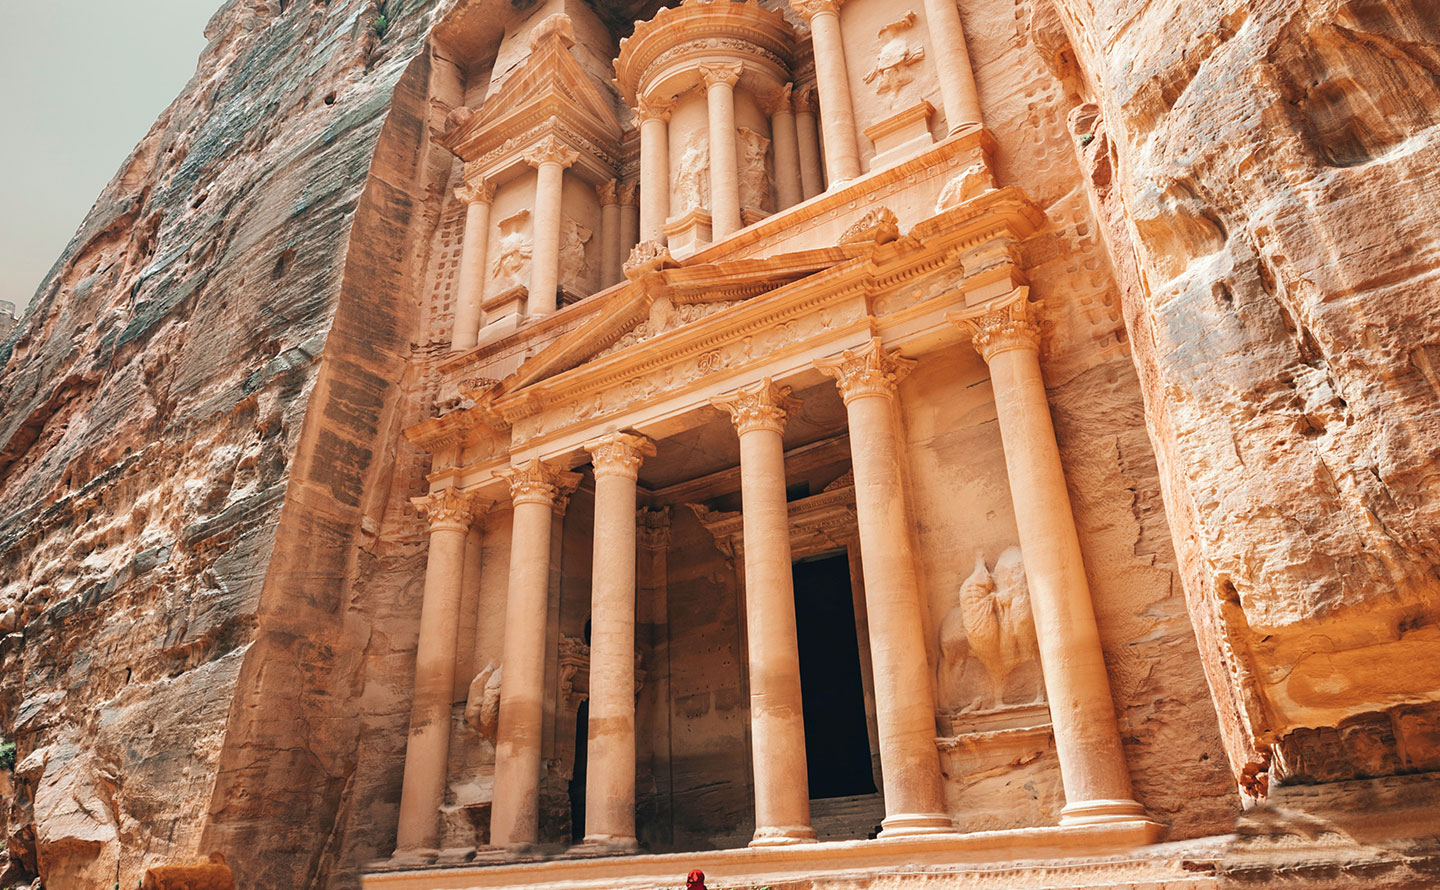 Petra Pictures - Be Mesmerized To Jordan's 'Rose City'